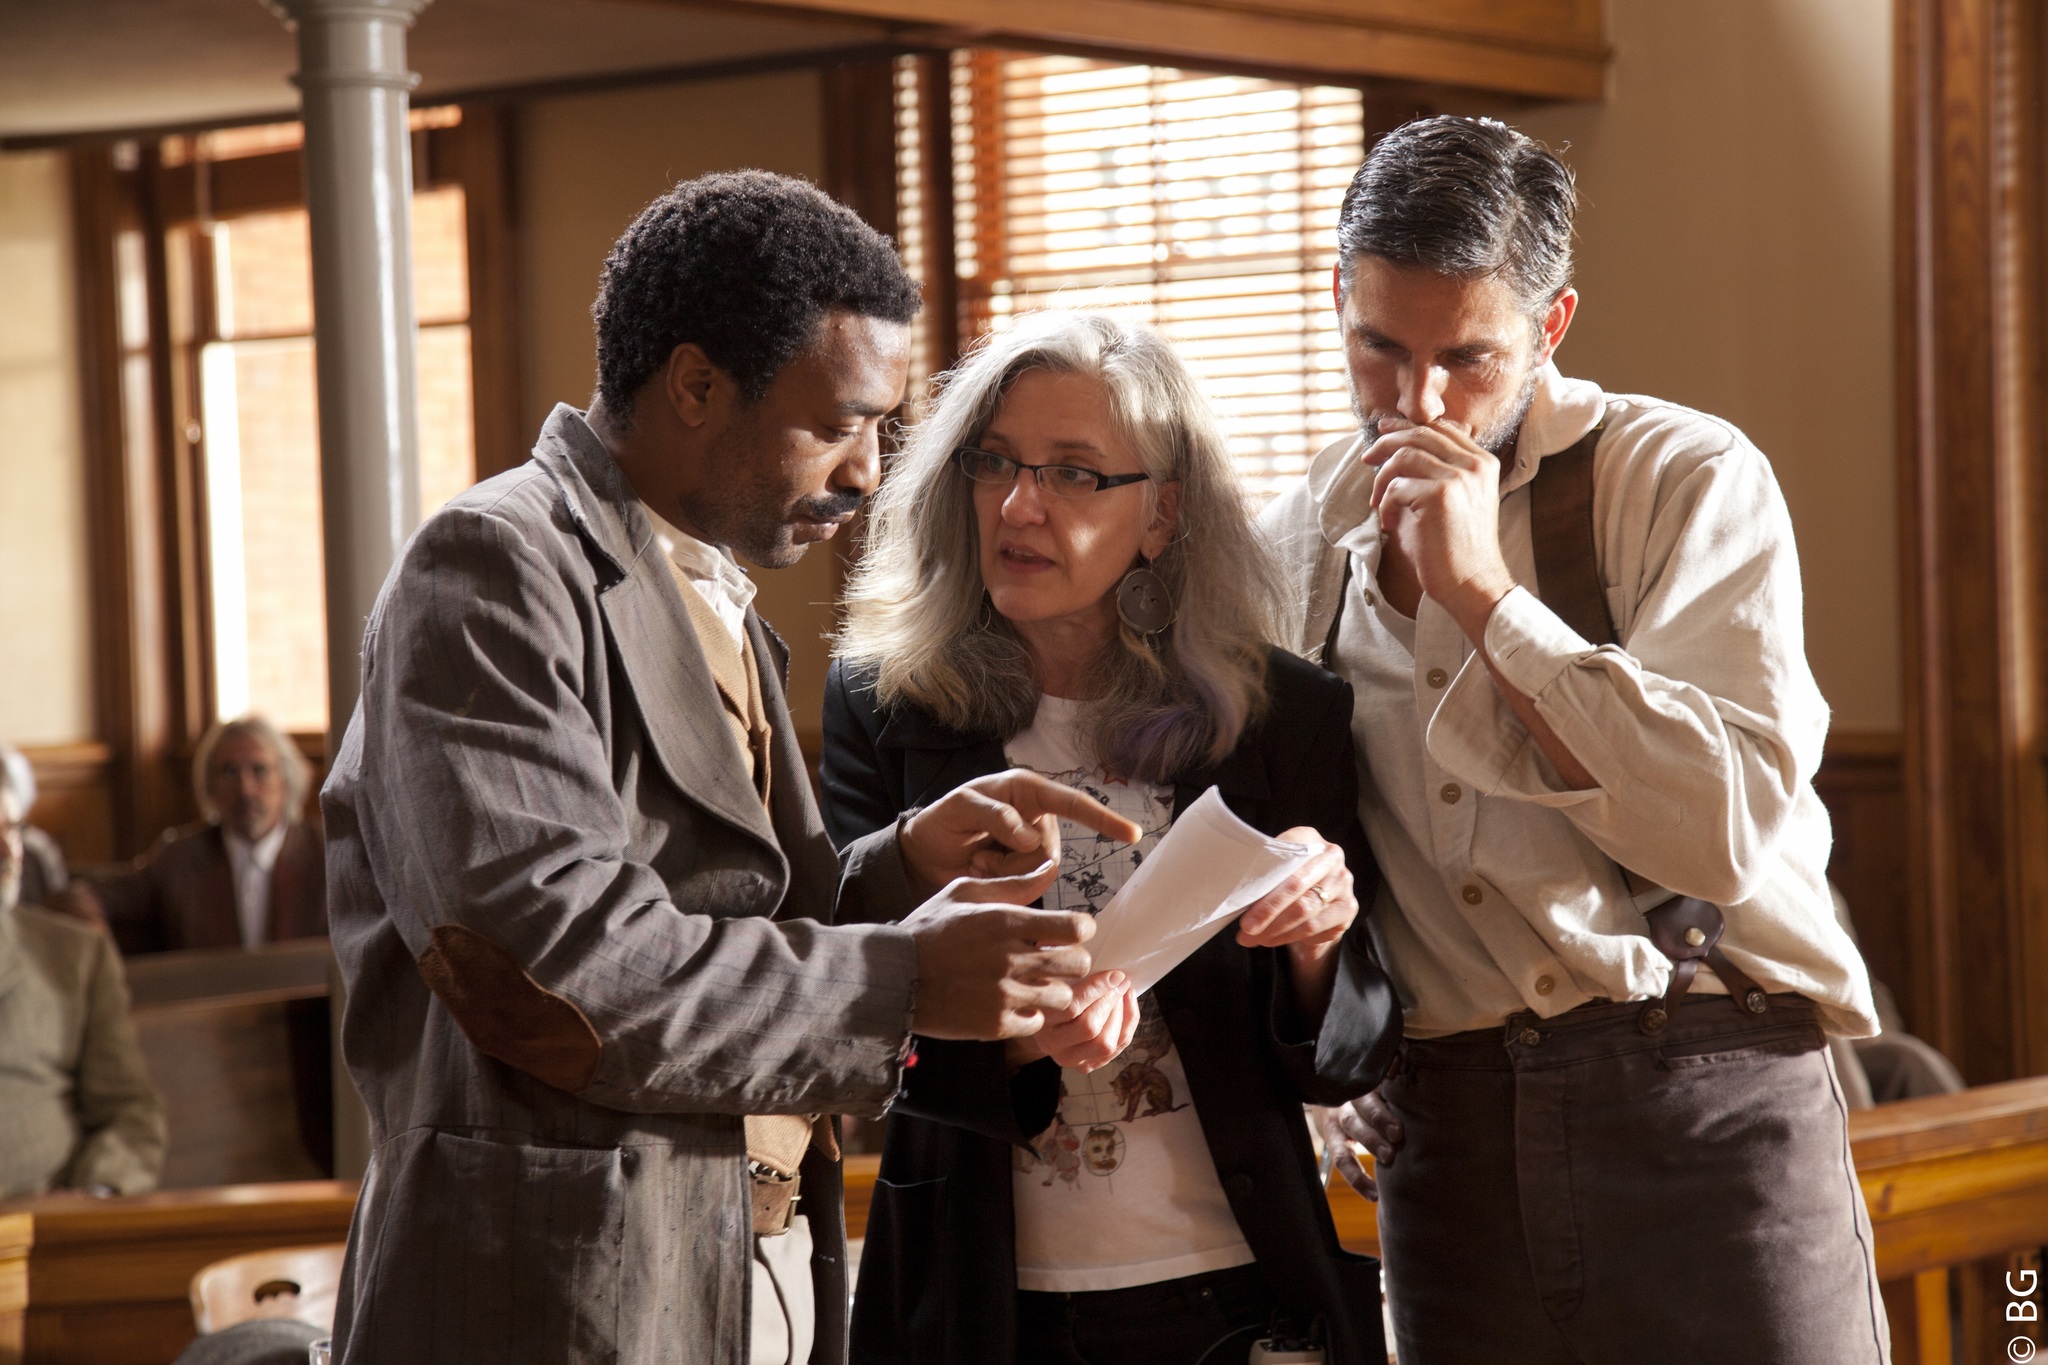 Still of Jim Caviezel and Chiwetel Ejiofor in Savannah (2013)